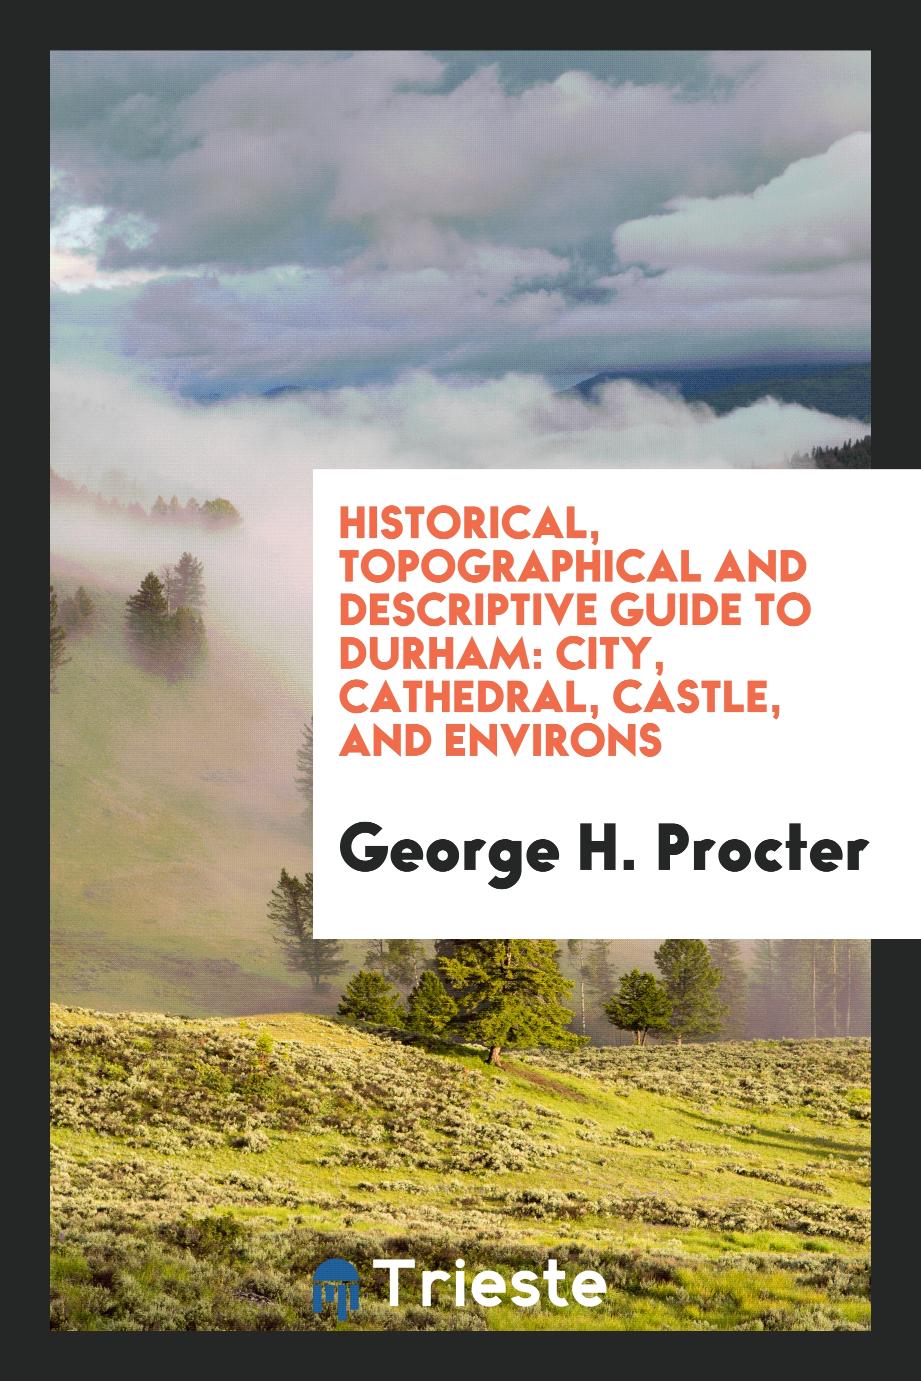 Historical, Topographical and Descriptive Guide to Durham: City, Cathedral, Castle, and Environs